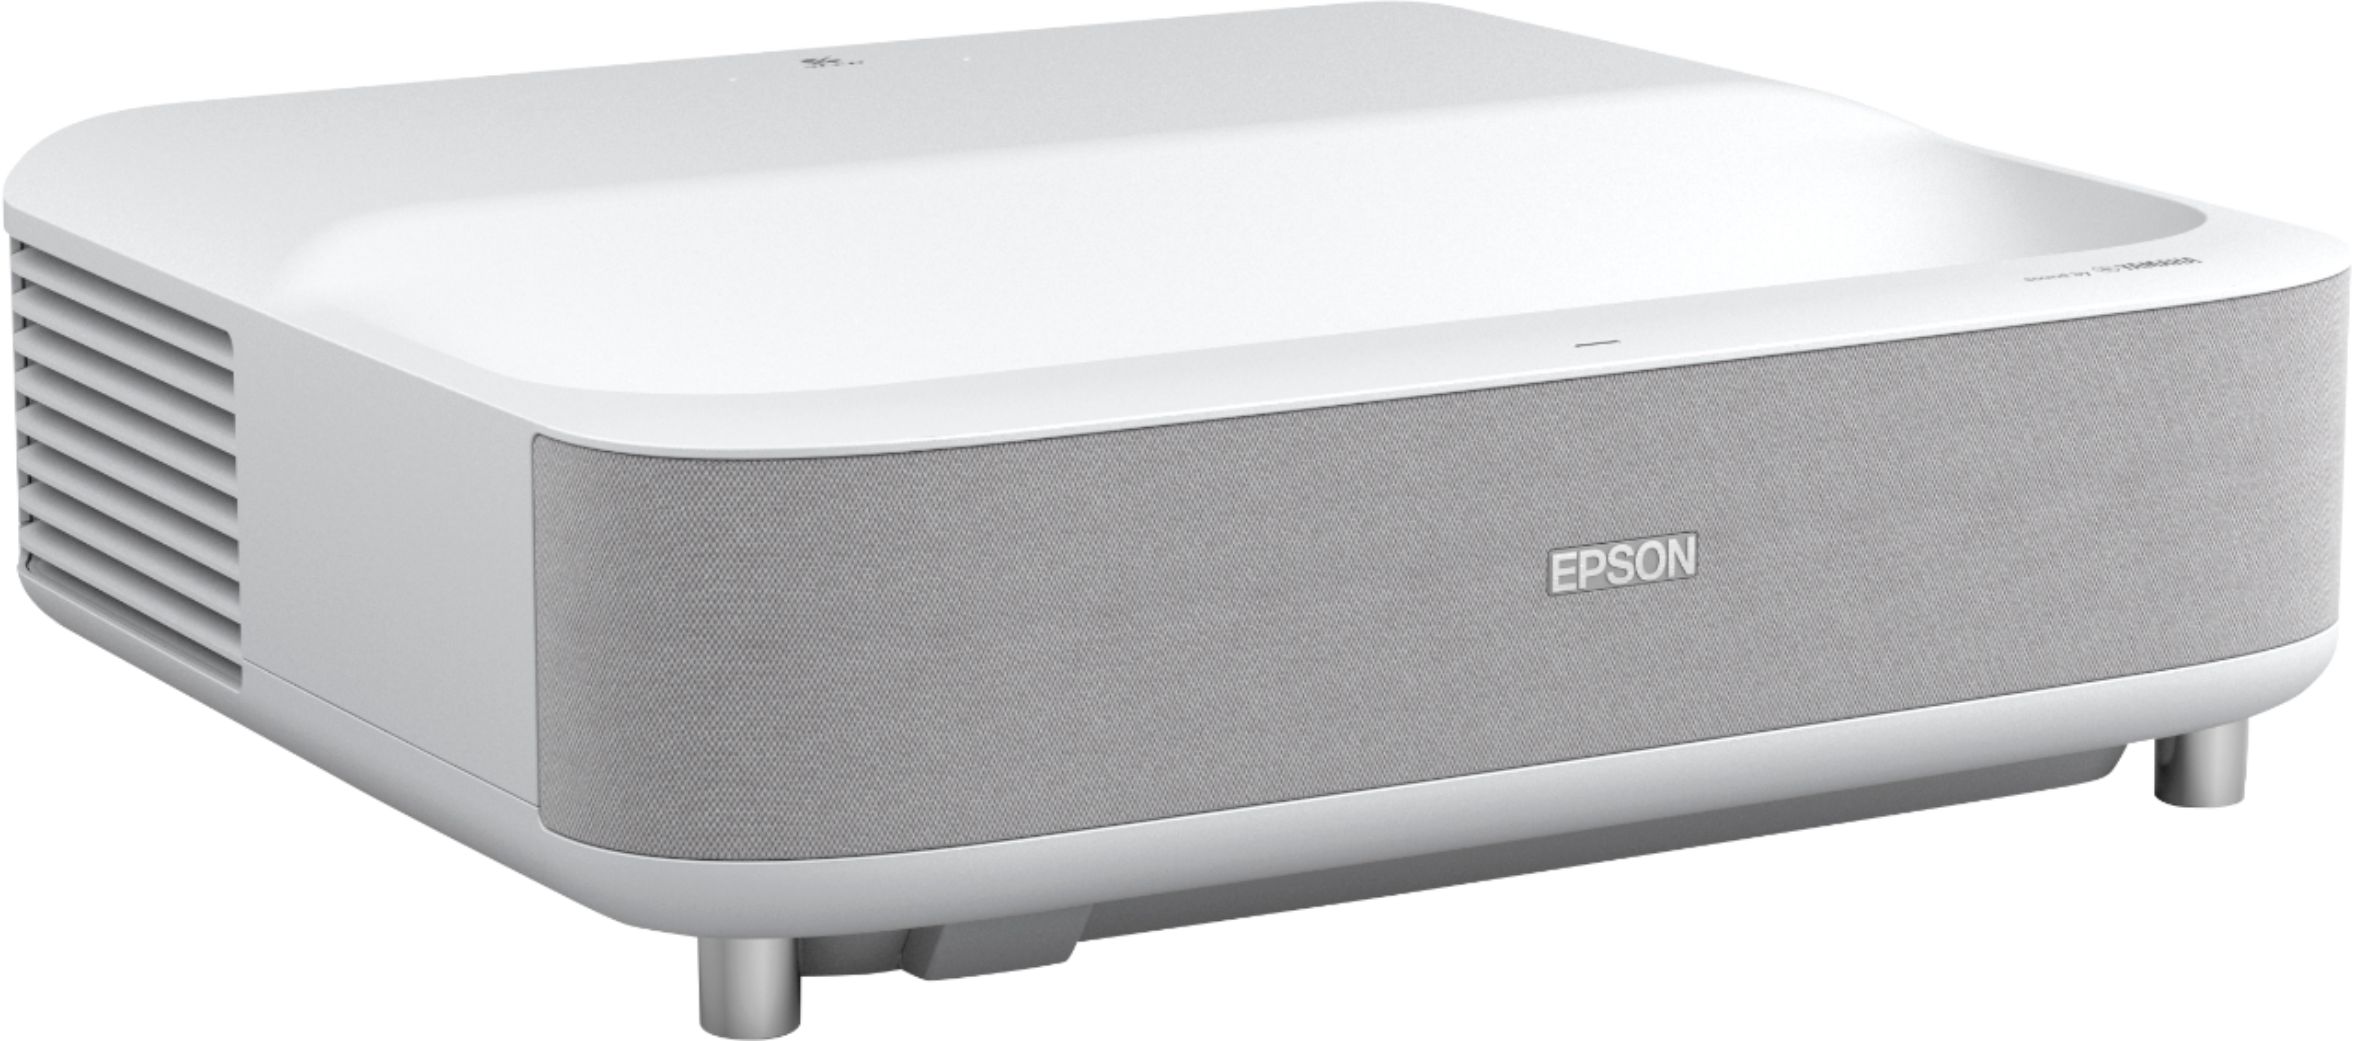 Epson - EpiqVision Ultra LS300 Smart Streaming Laser Short Throw Projector, 3600 lumens, HDR, Android TV, Sports - White